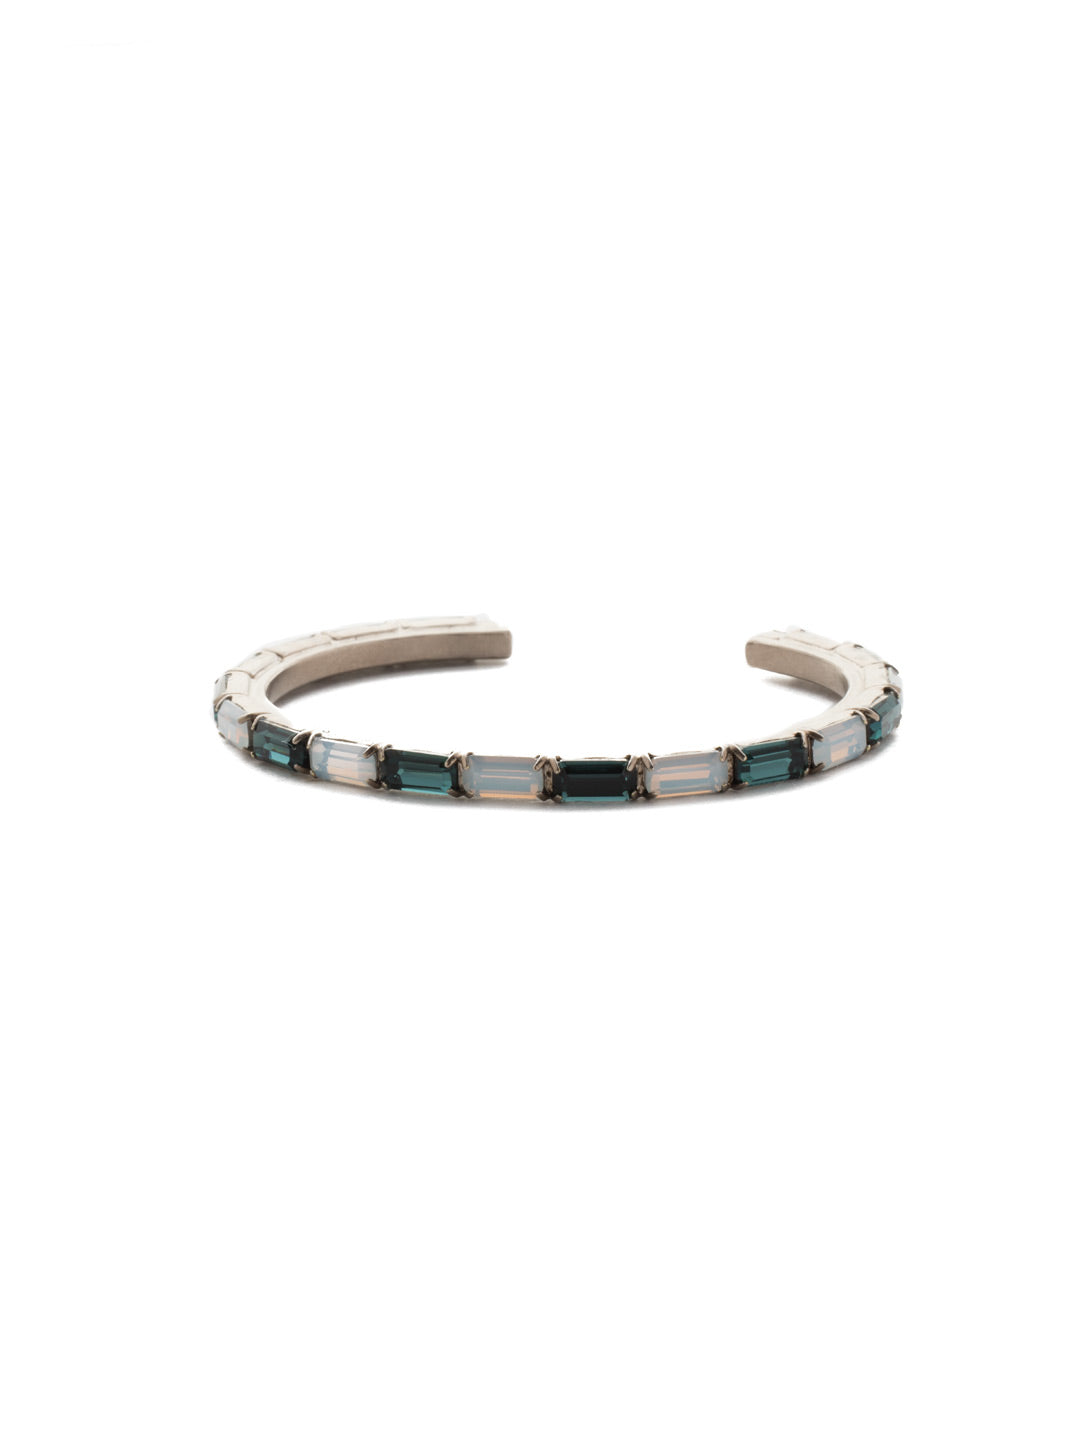 Brilliant Baguette Cuff Bracelet - BDK49ASGBL - This cuff bracelet features repeating crystal baguettes and can be mixed and matched in a myriad of ways. From Sorrelli's Glory Blue collection in our Antique Silver-tone finish.